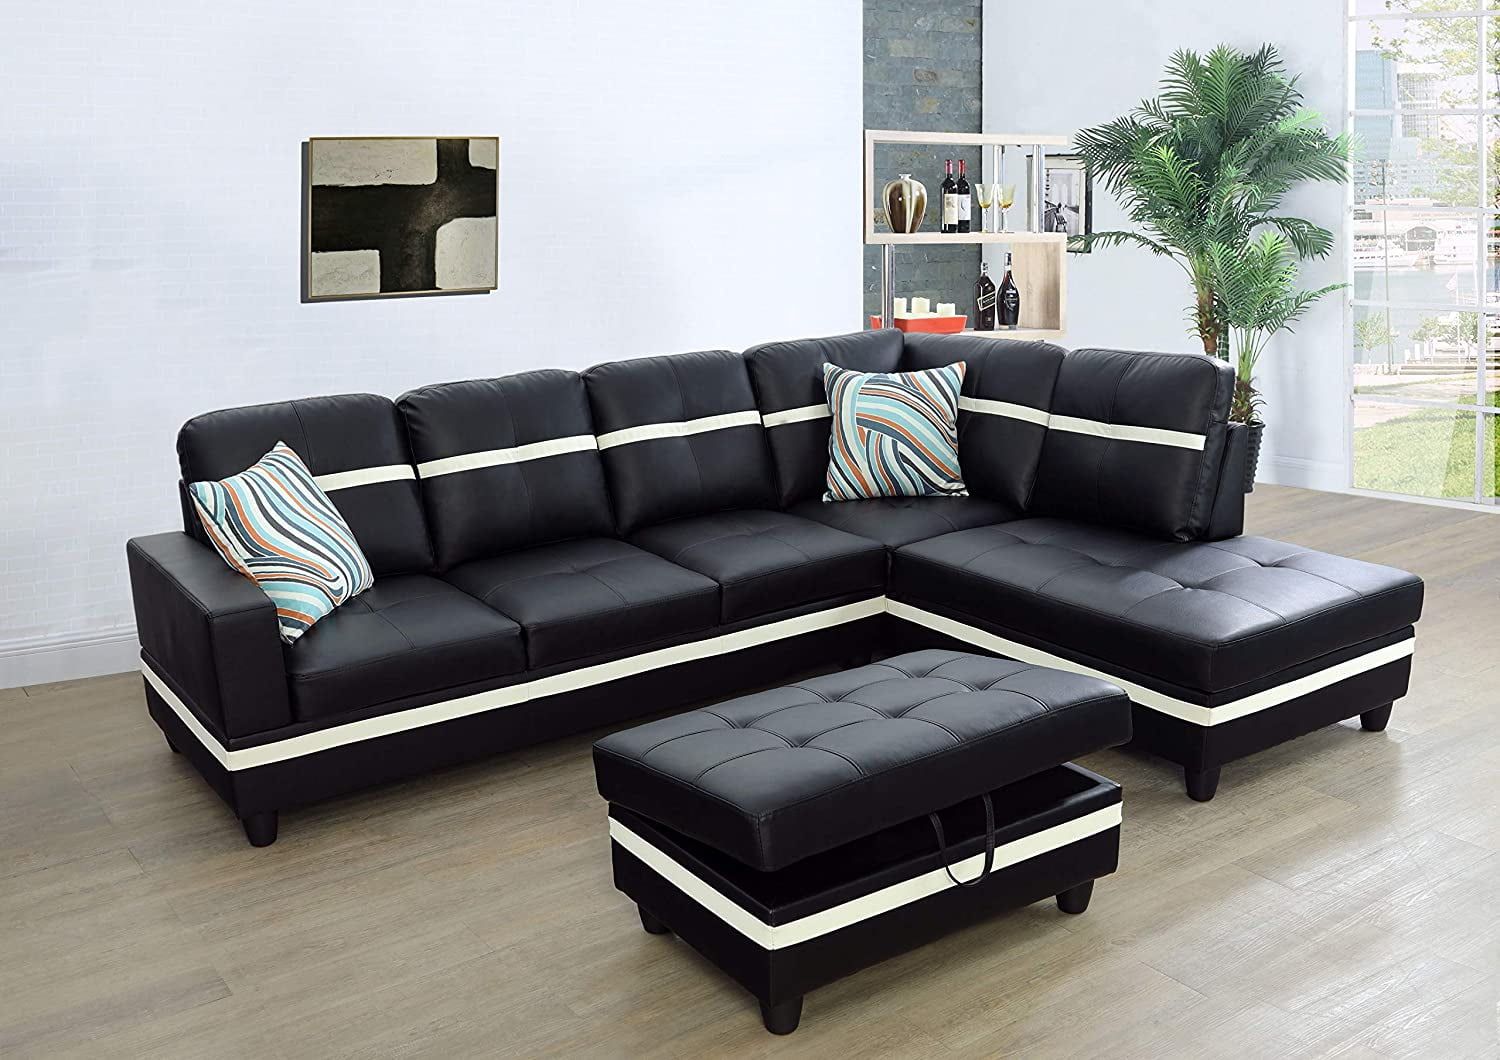 Ponliving Furniture Faux Leather 3 Piece Sectional Sofa Couch Set, L Shaped  Modern Sofa With Chaise Storage Ottoman And Pillows For Living Room  Furniture – Walmart In 3 Piece Leather Sectional Sofa Sets (Photo 13 of 15)